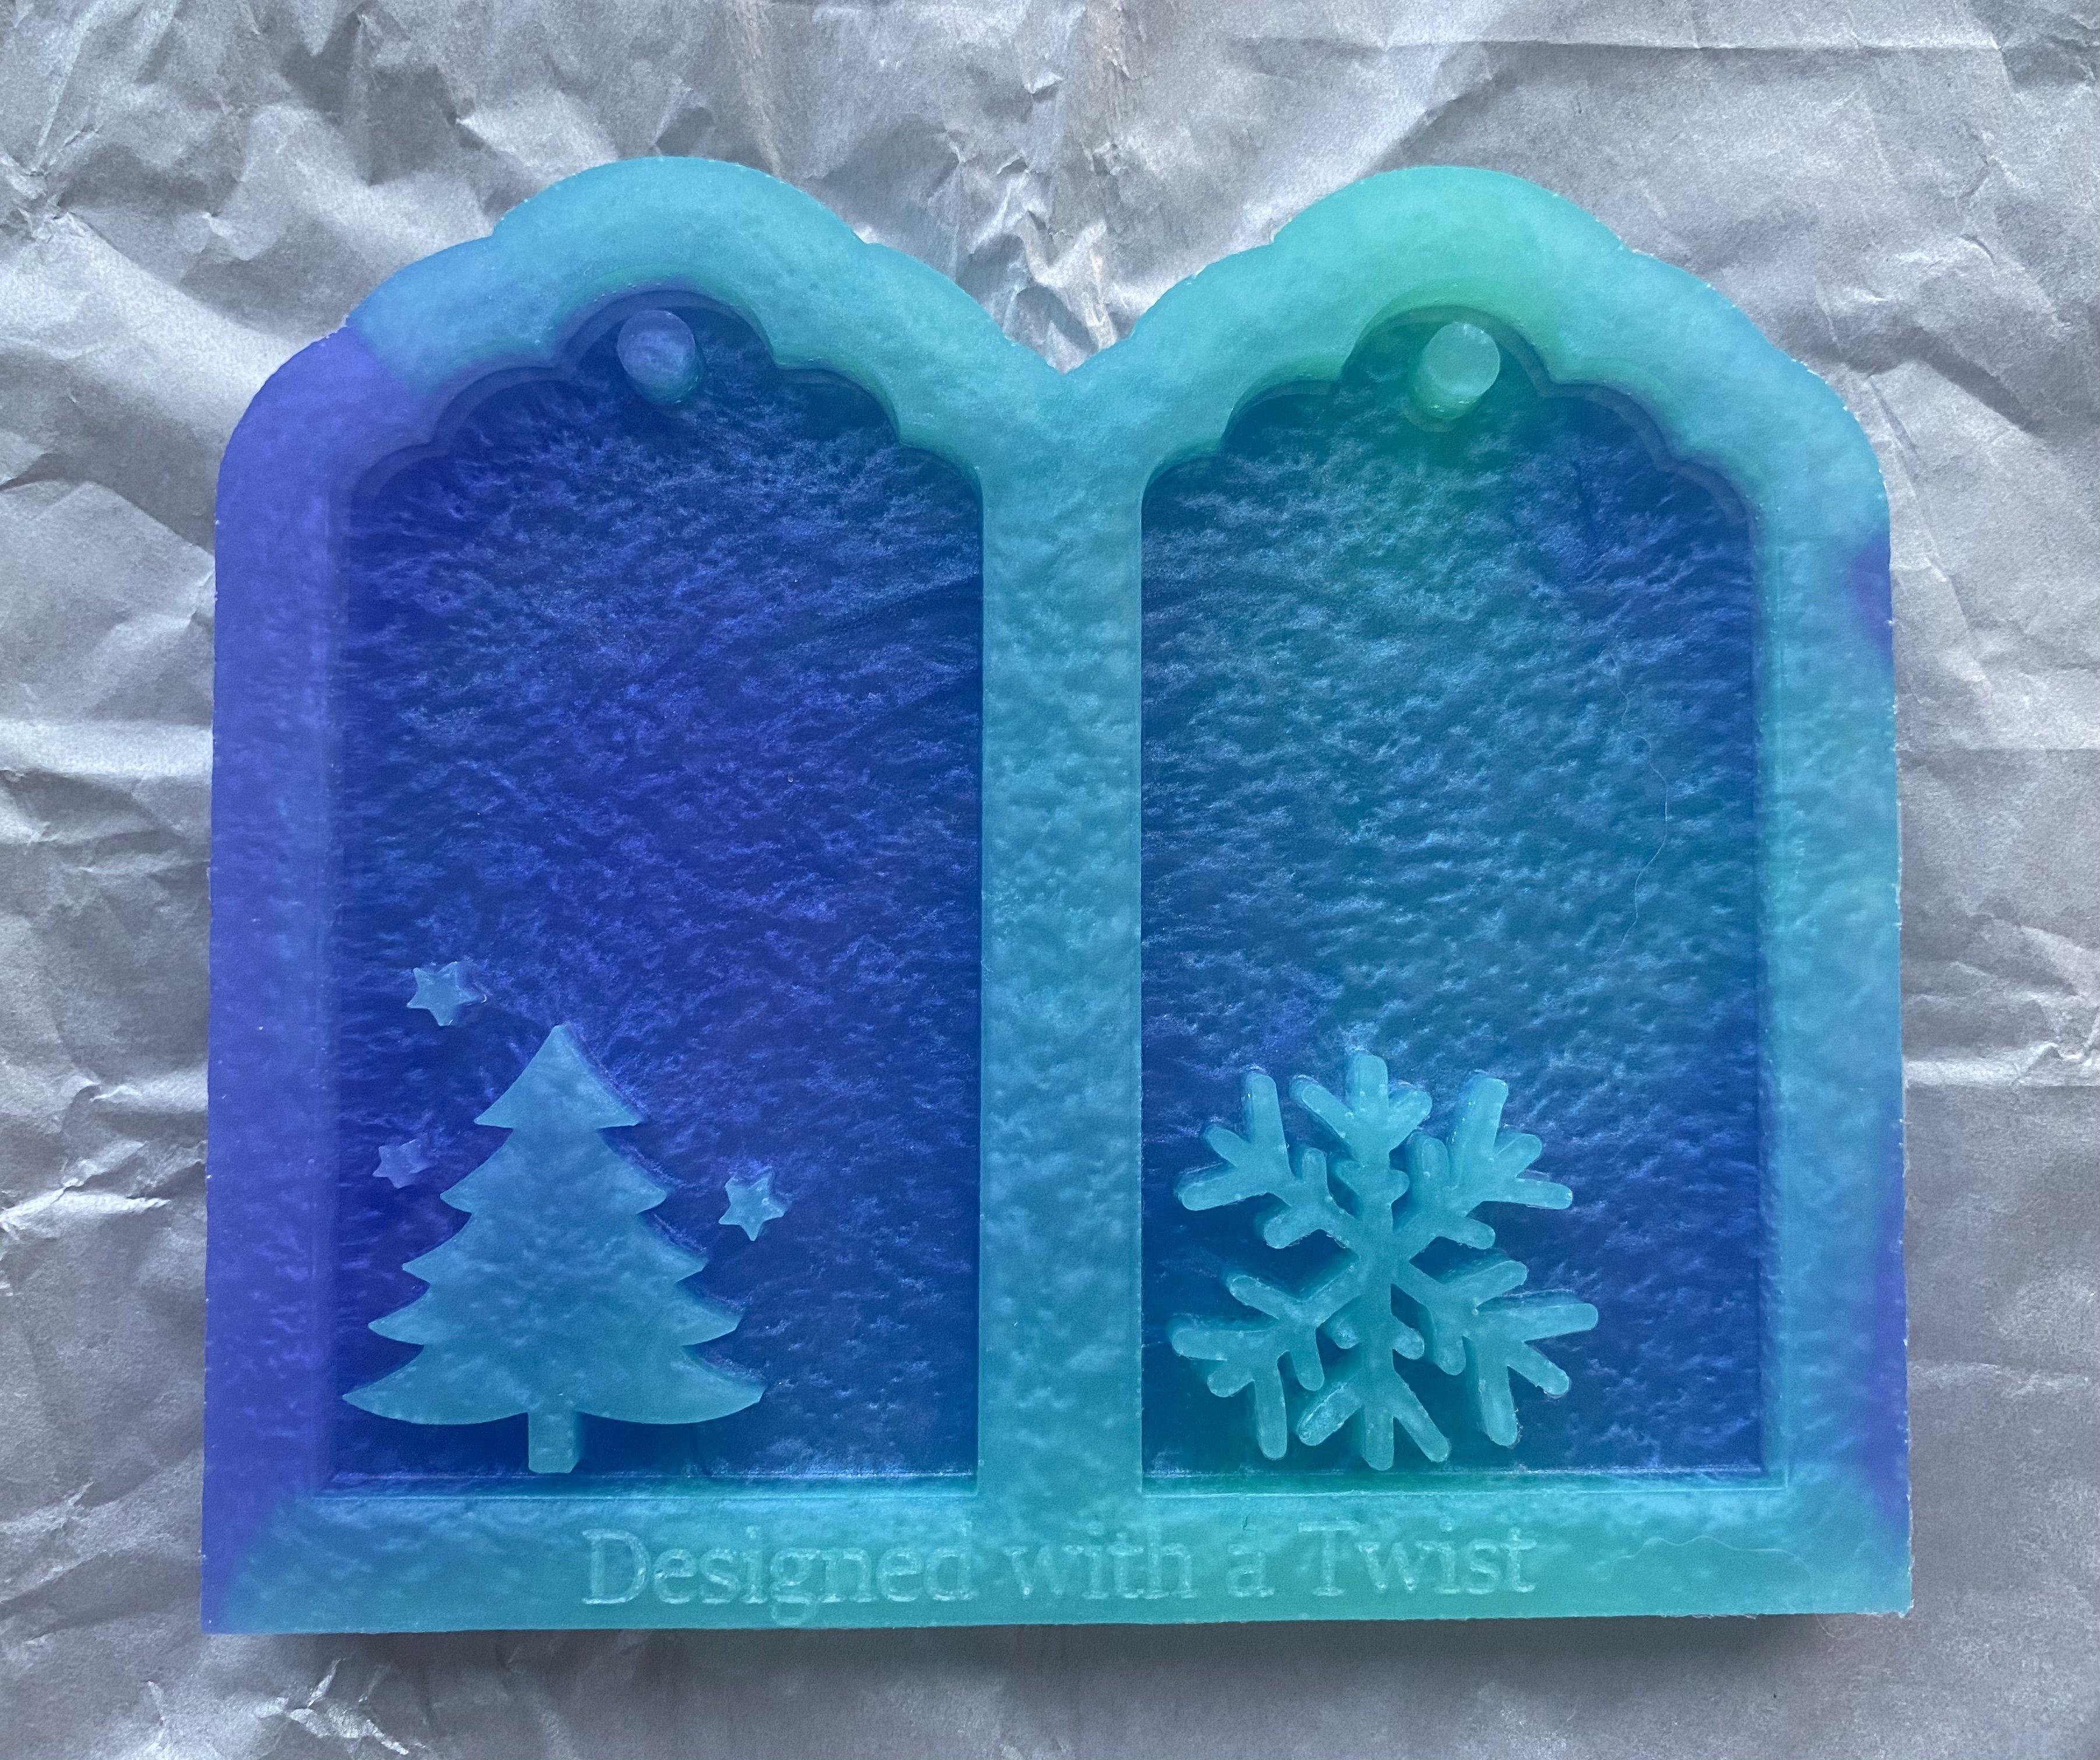 Christmas Gift Tag Silicone Mold - Designed with a Twist  - Top quality silicone molds made in the UK.